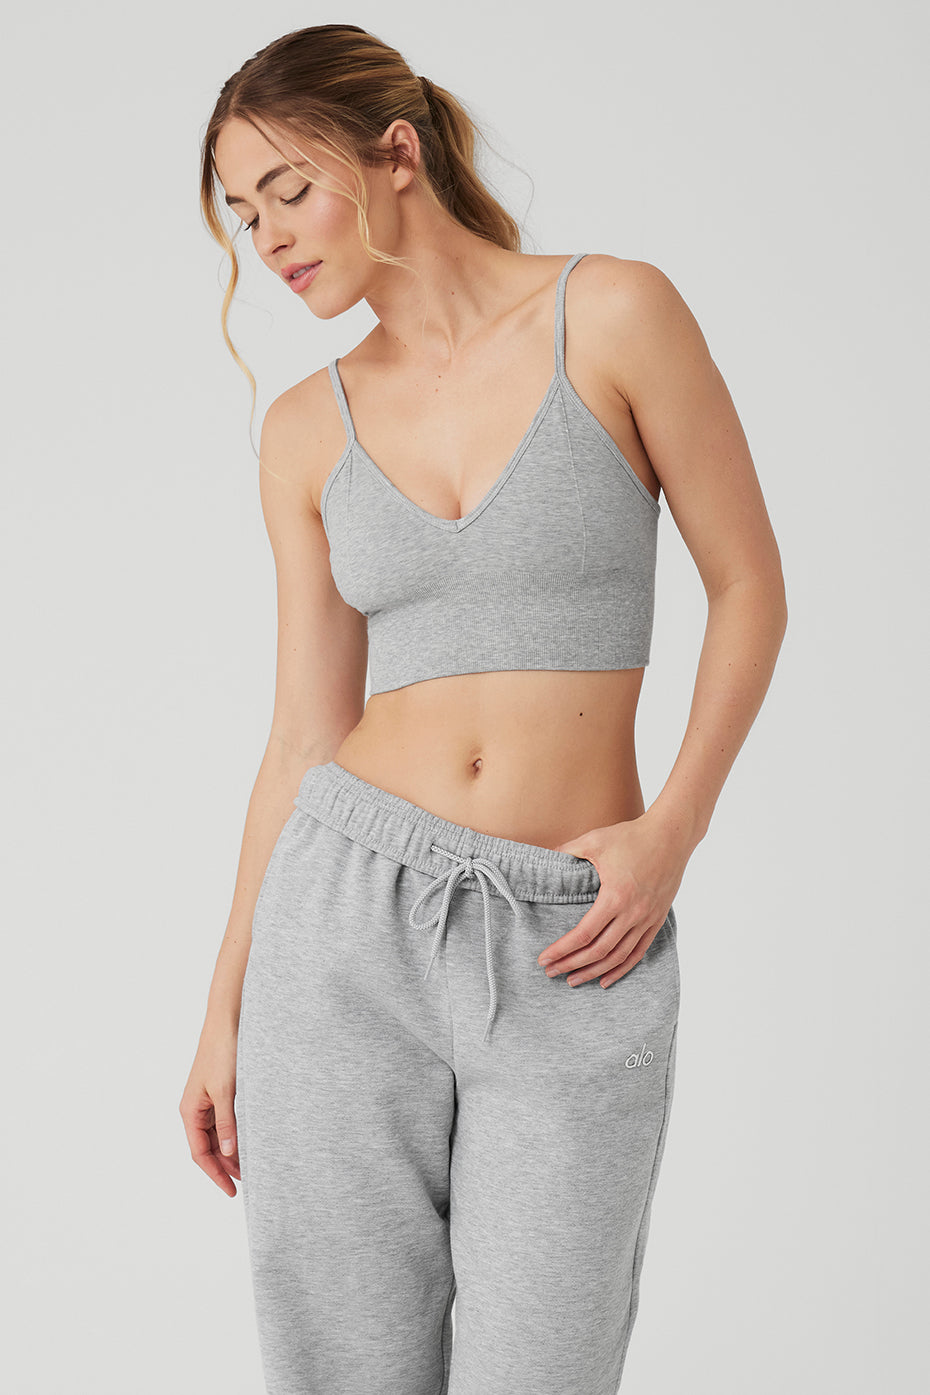 ALO YOGA Delight Bralette - Women's for Sale, Reviews, Deals and Guides